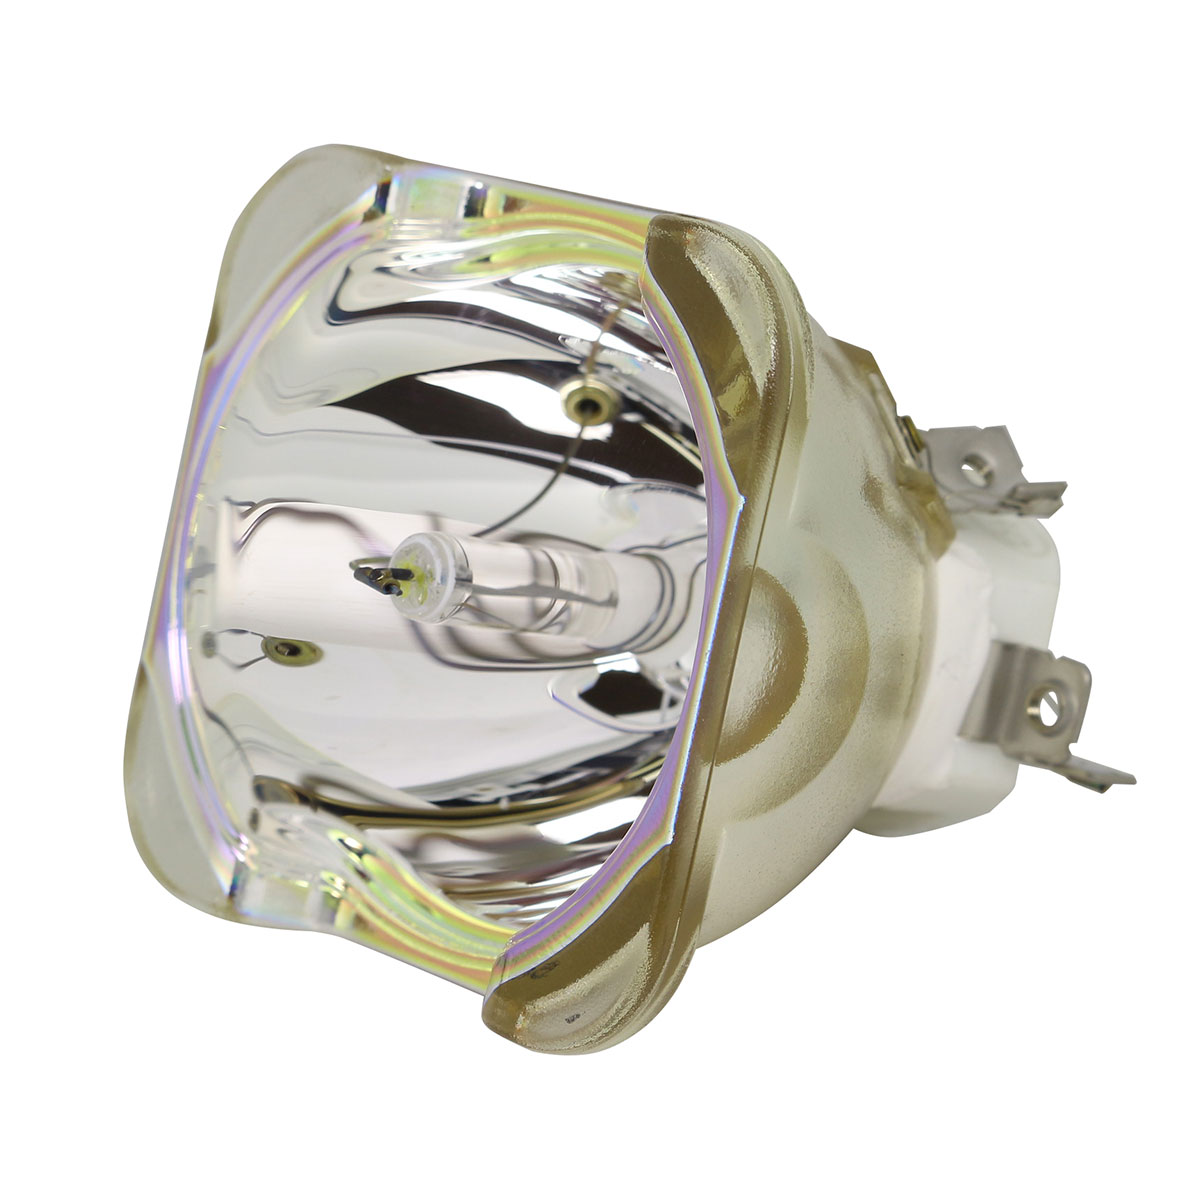 Ushio NSH Replacement Bulb for the Christie Digital Boxer 2K20 Projector - image 2 of 8